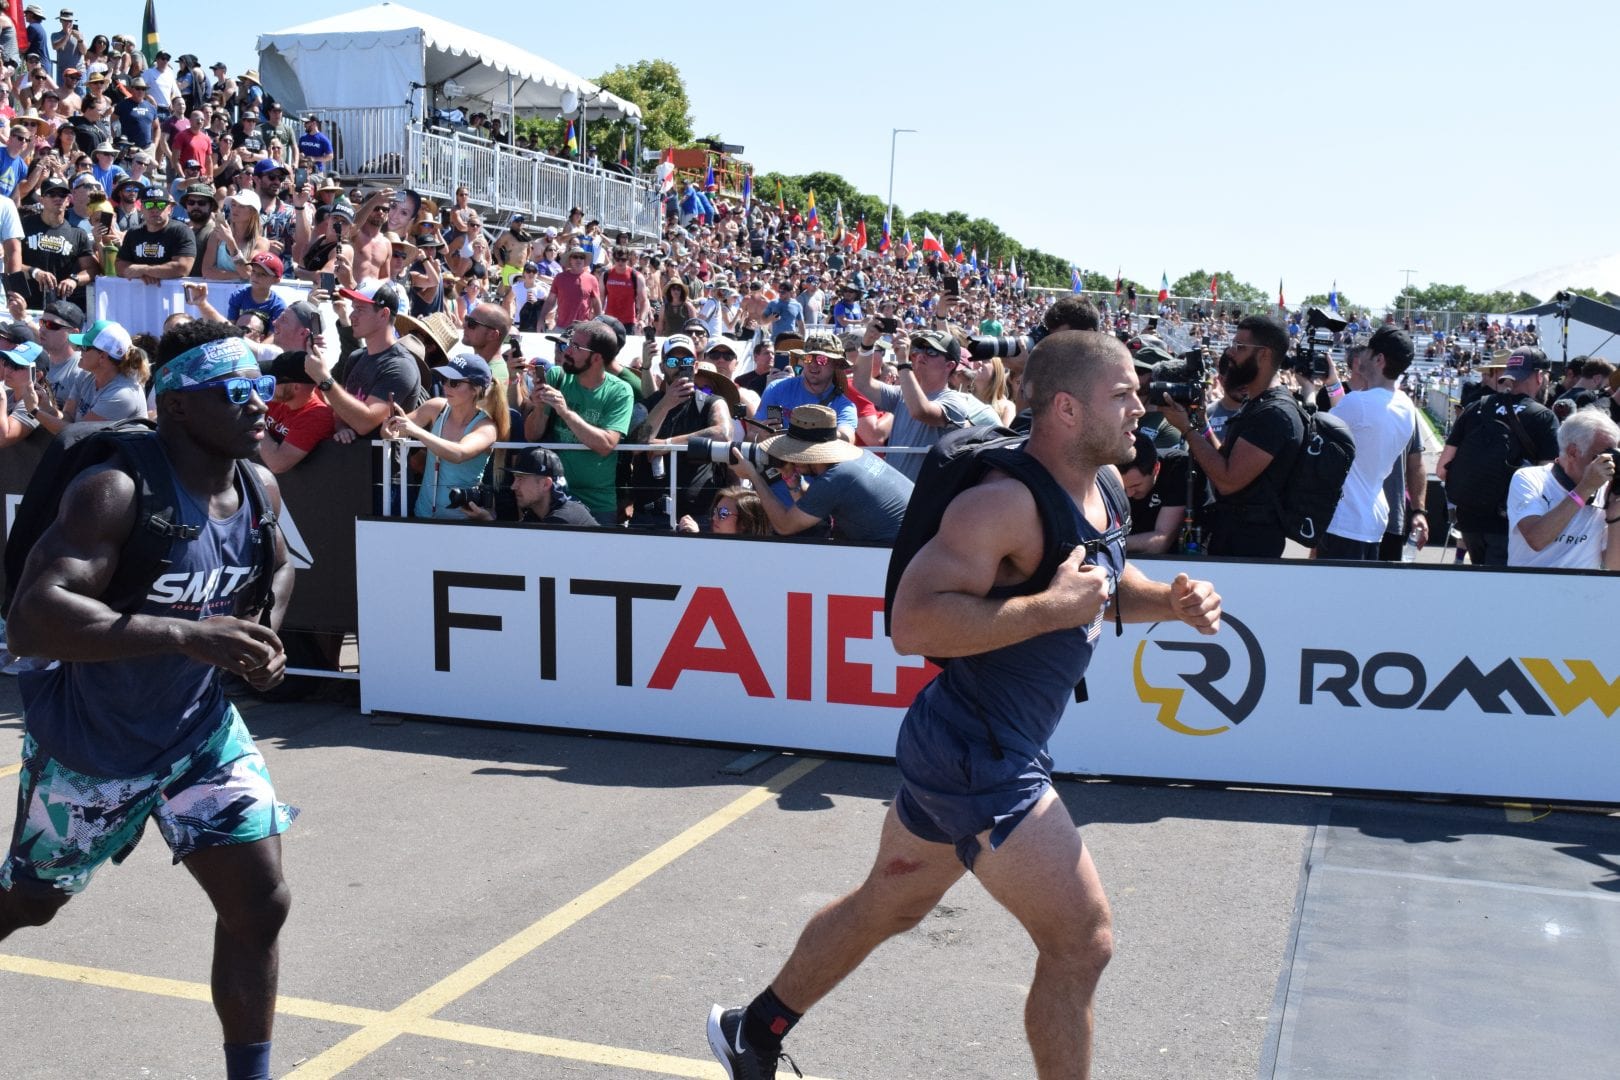 Chandler Smith chases down Jacob Heppner in the Ruck Run event at the 2019 CrossFit Games.